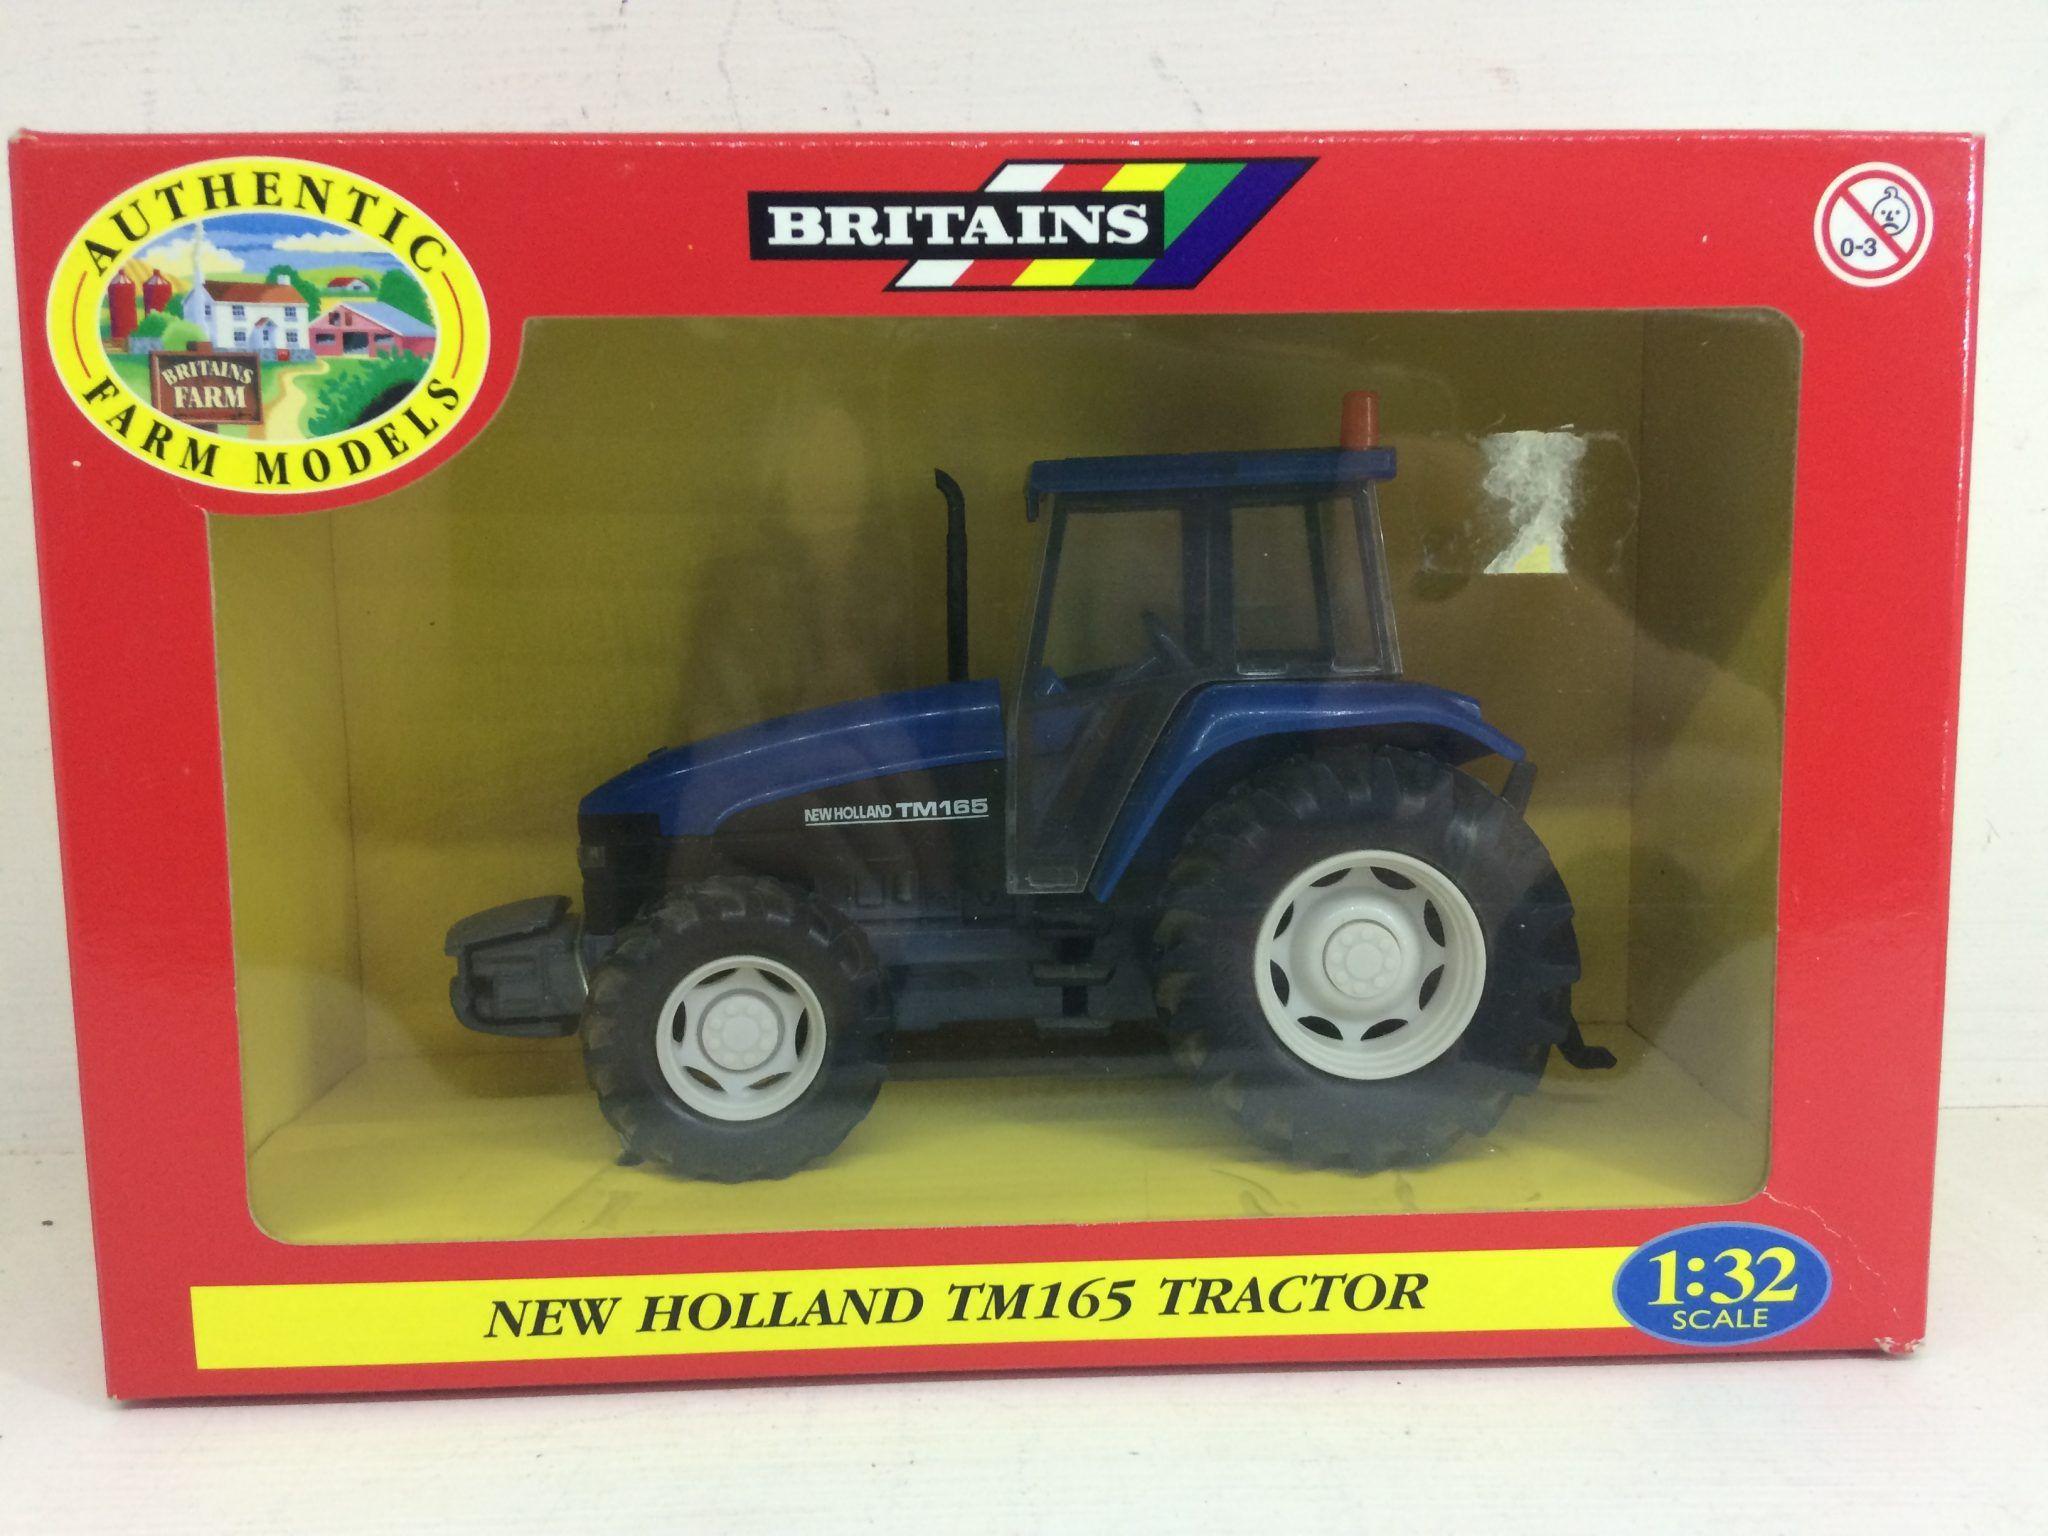 Vintage New Holland Logo - Vintage Britains New Holland TM165 Tractor White Model Scenery